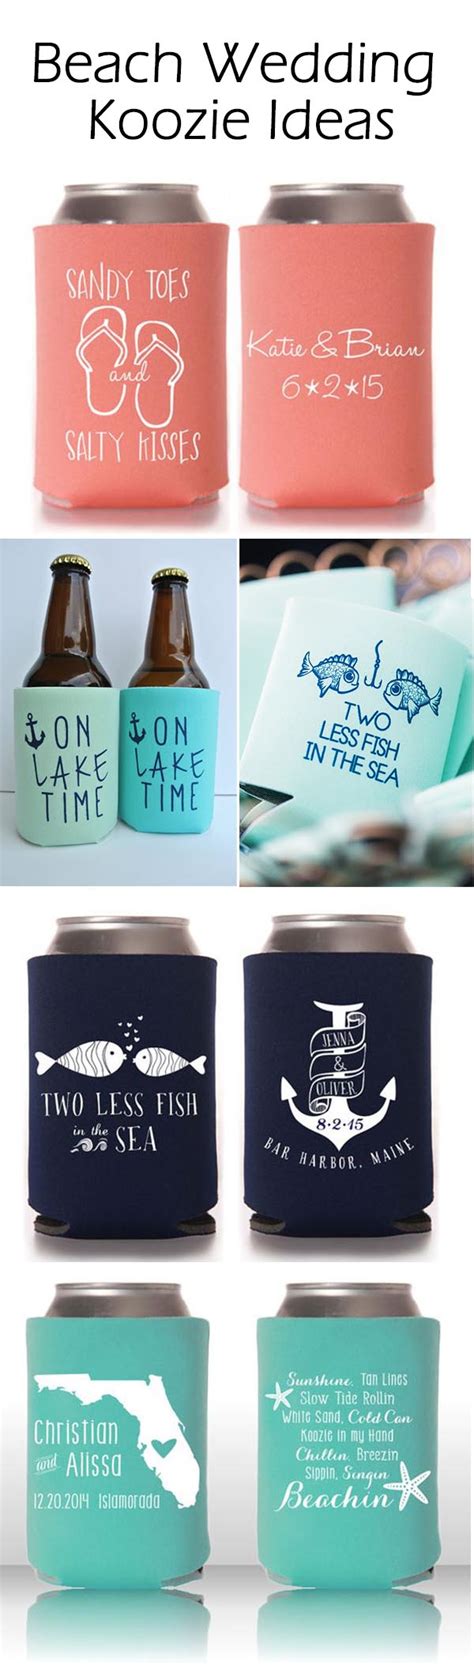 Cool Summer Wedding Ideas With Personalized Koozie Favors Blog